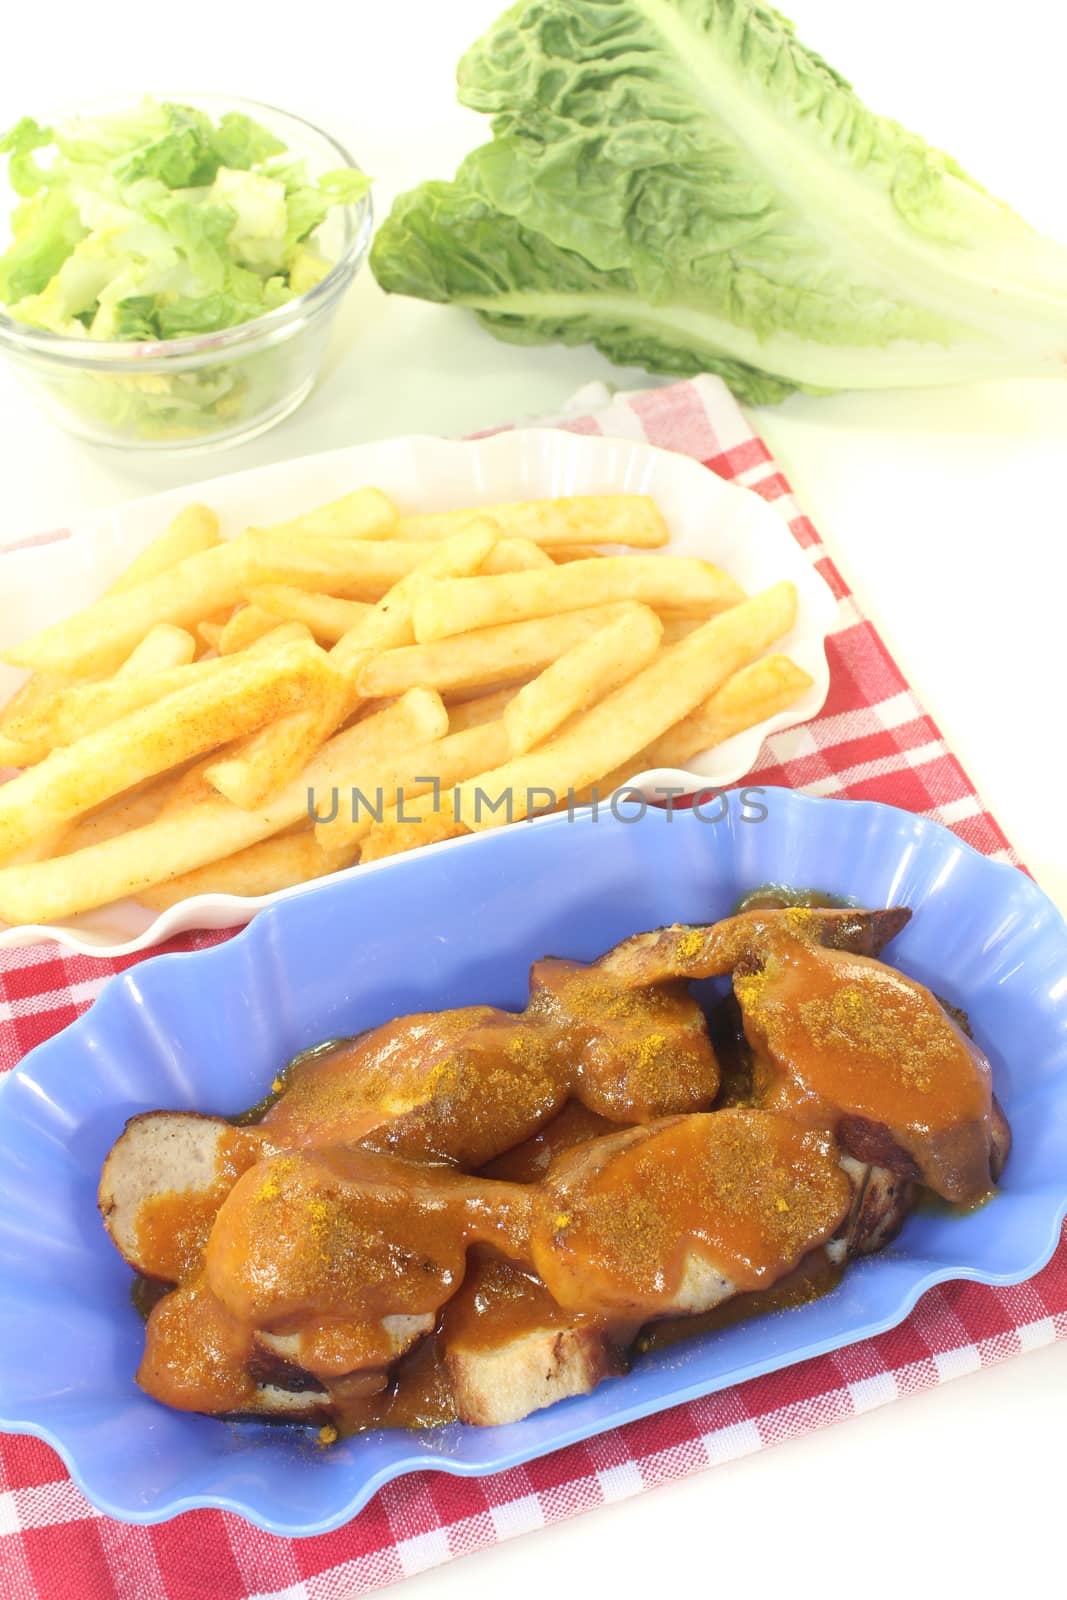 Currywurst with french fries with salad by discovery